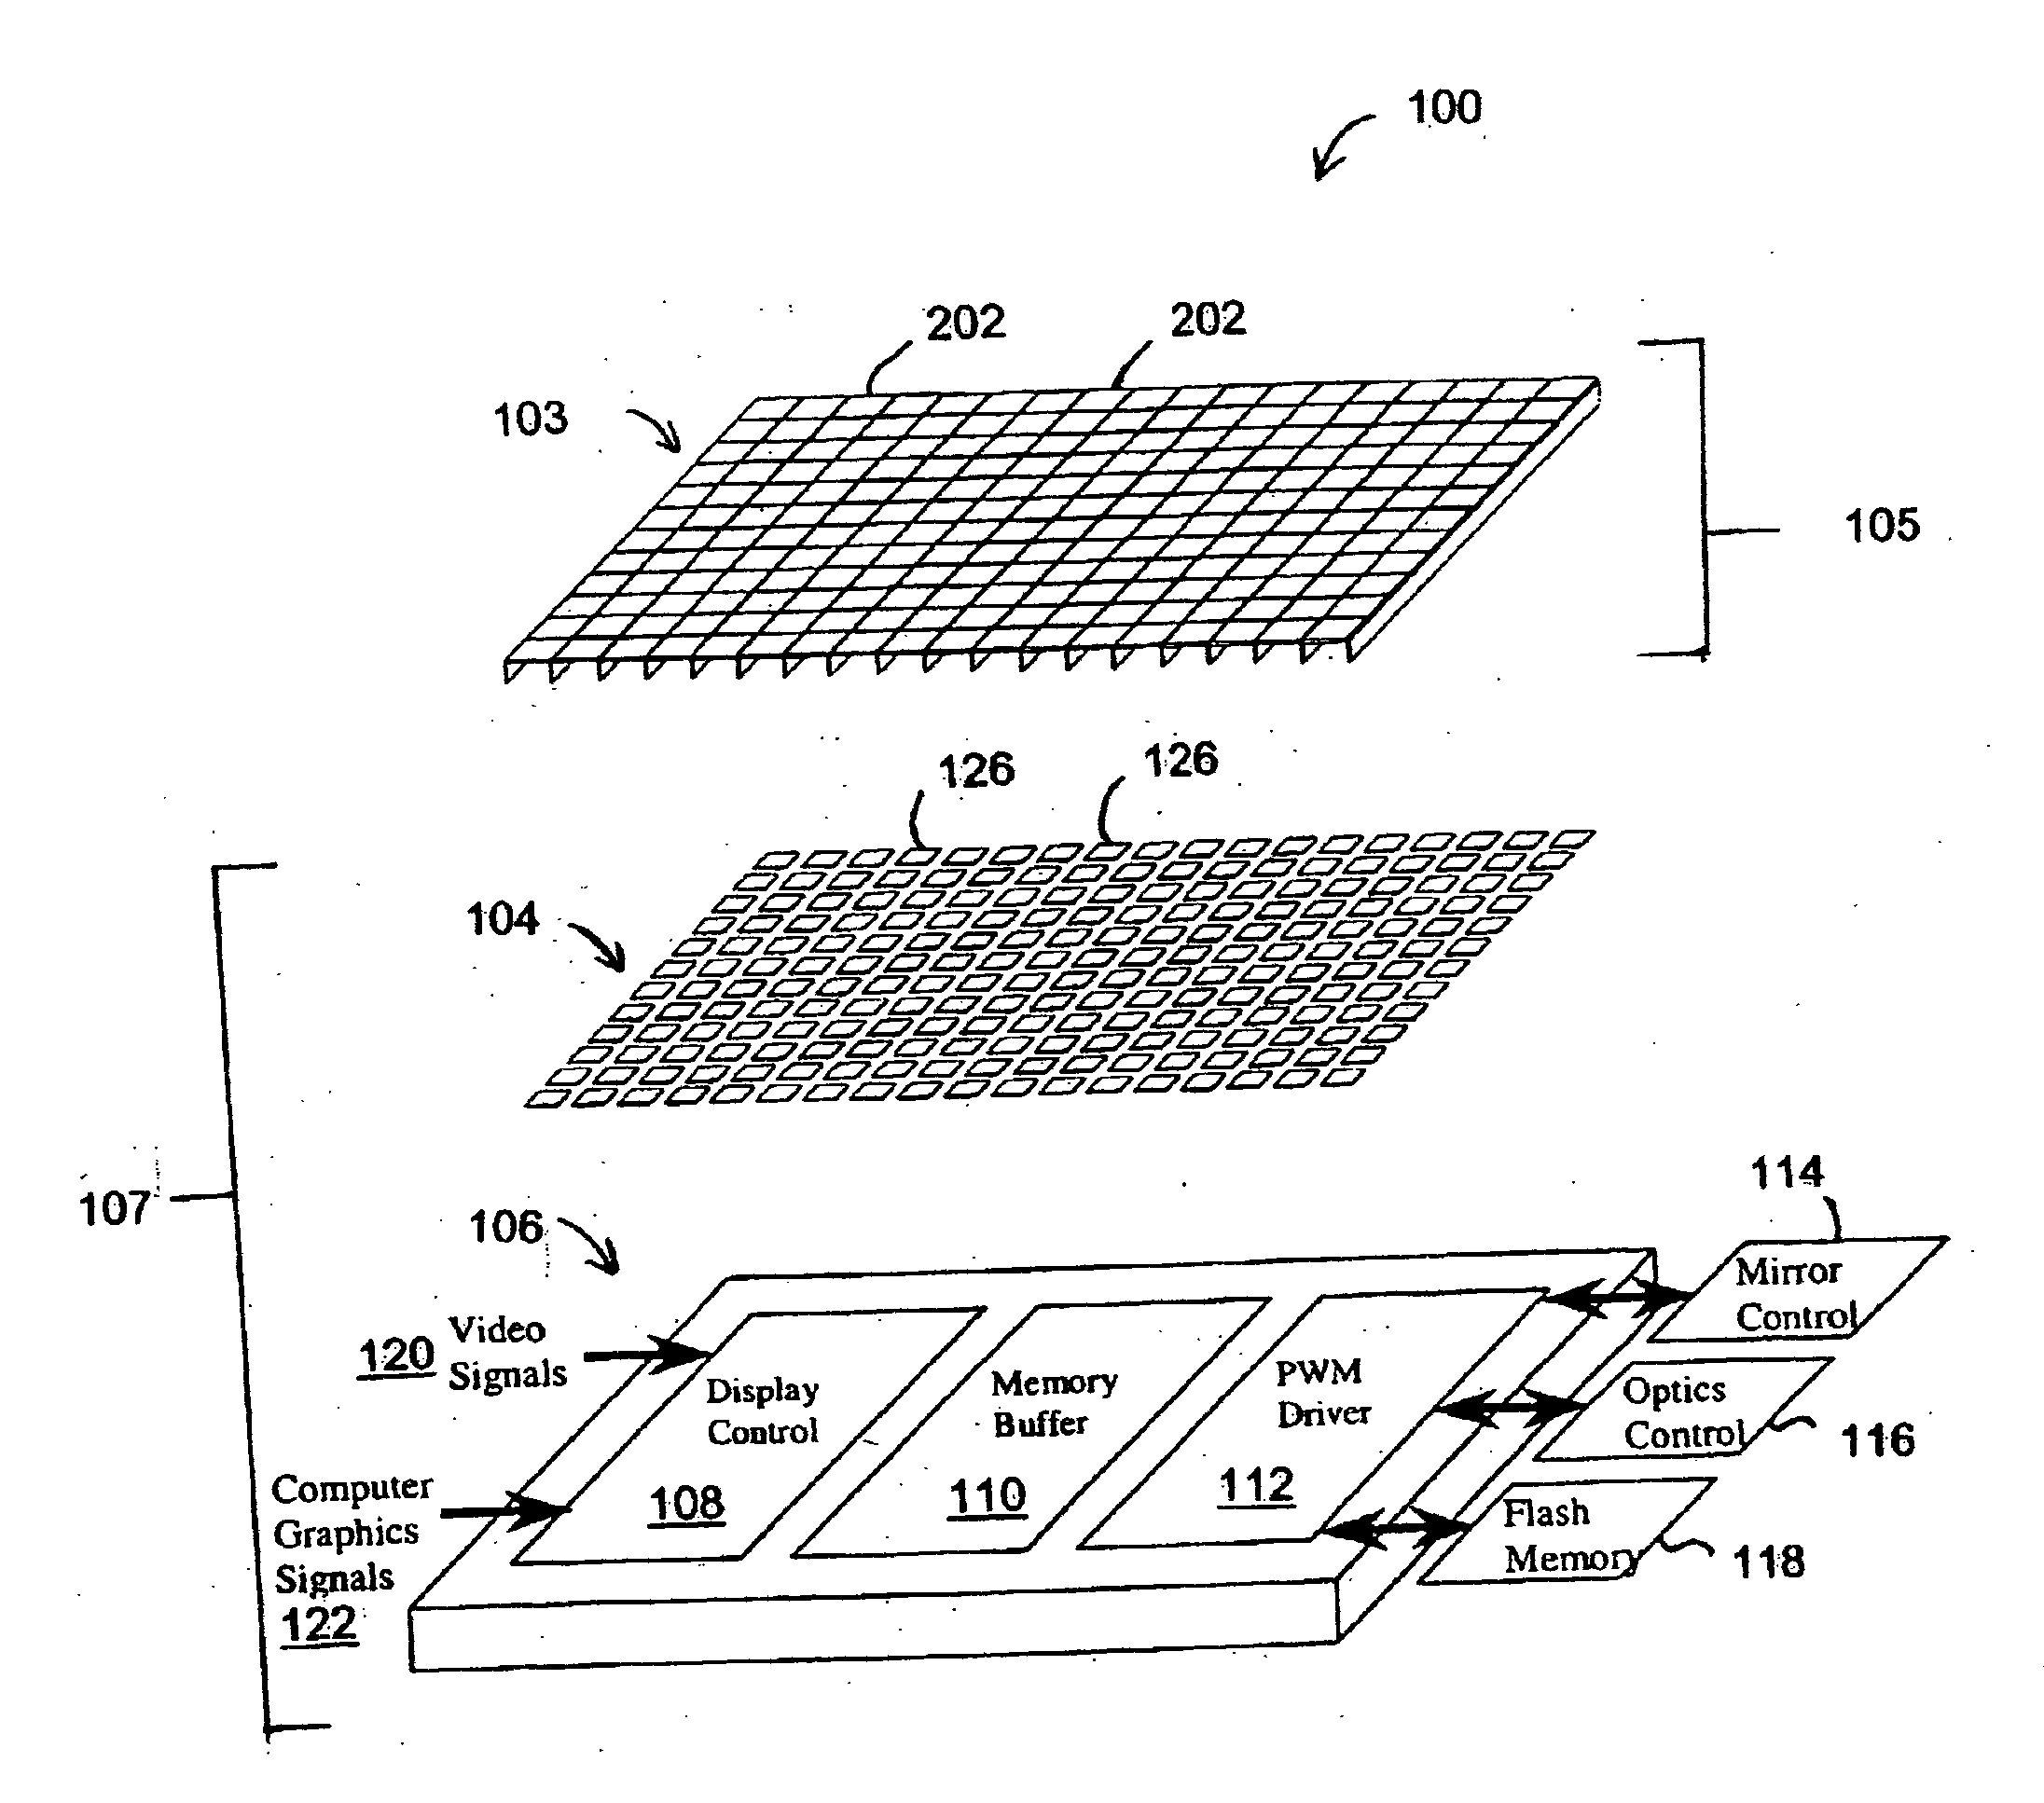 Electrical contact method and structure for deflection devices formed in an array configuration